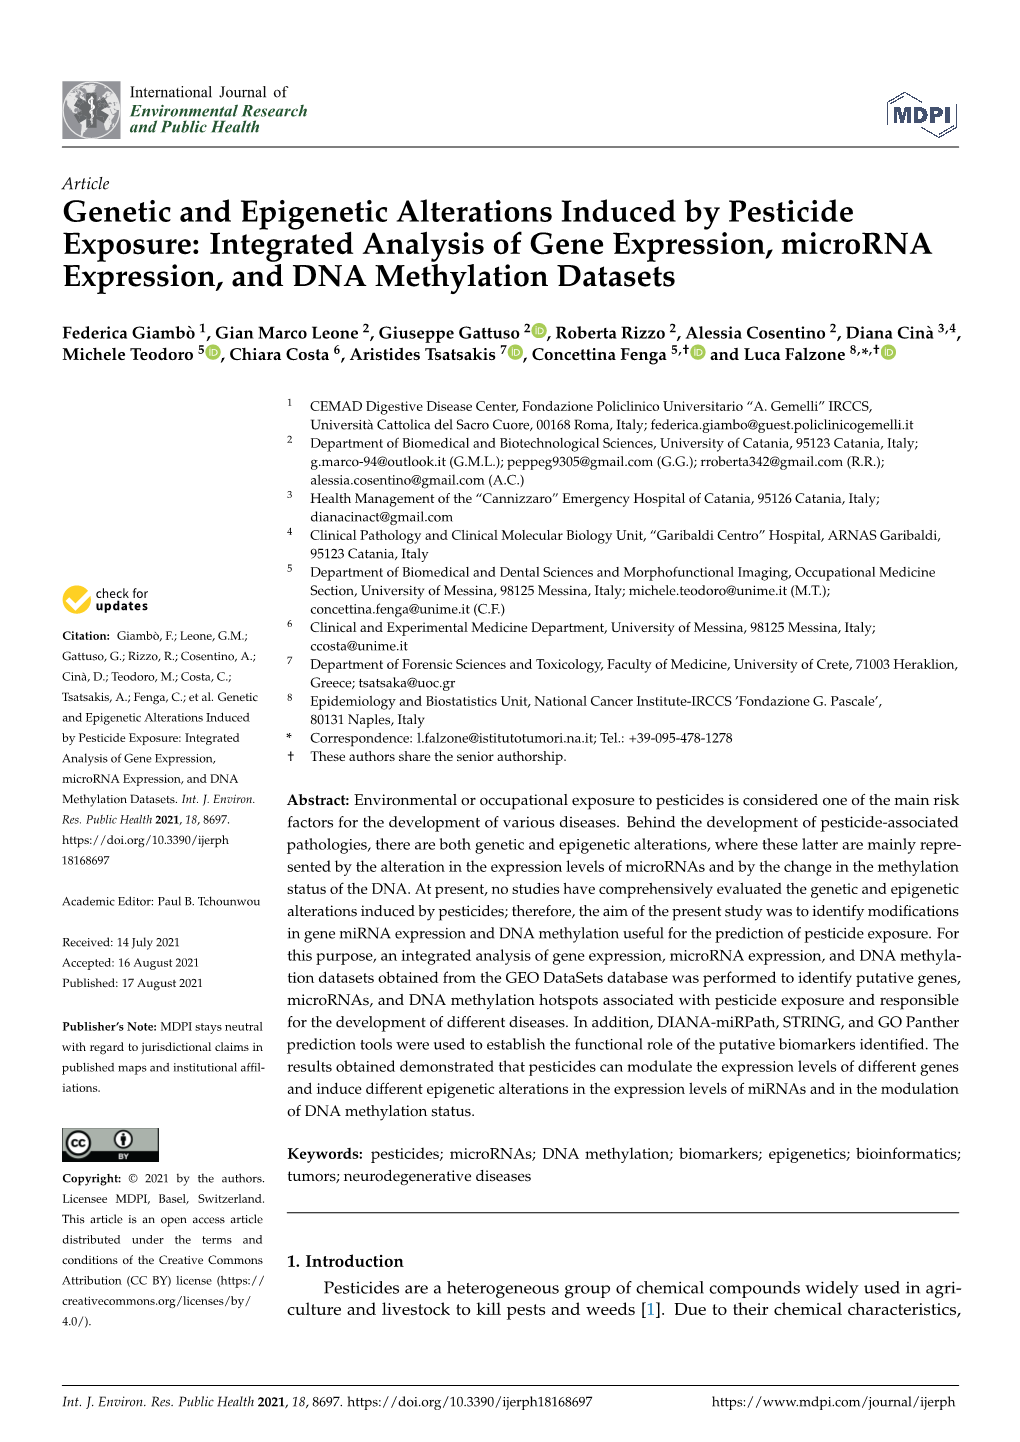 Genetic and Epigenetic Alterations Induced by Pesticide Exposure: Integrated Analysis of Gene Expression, Microrna Expression, and DNA Methylation Datasets